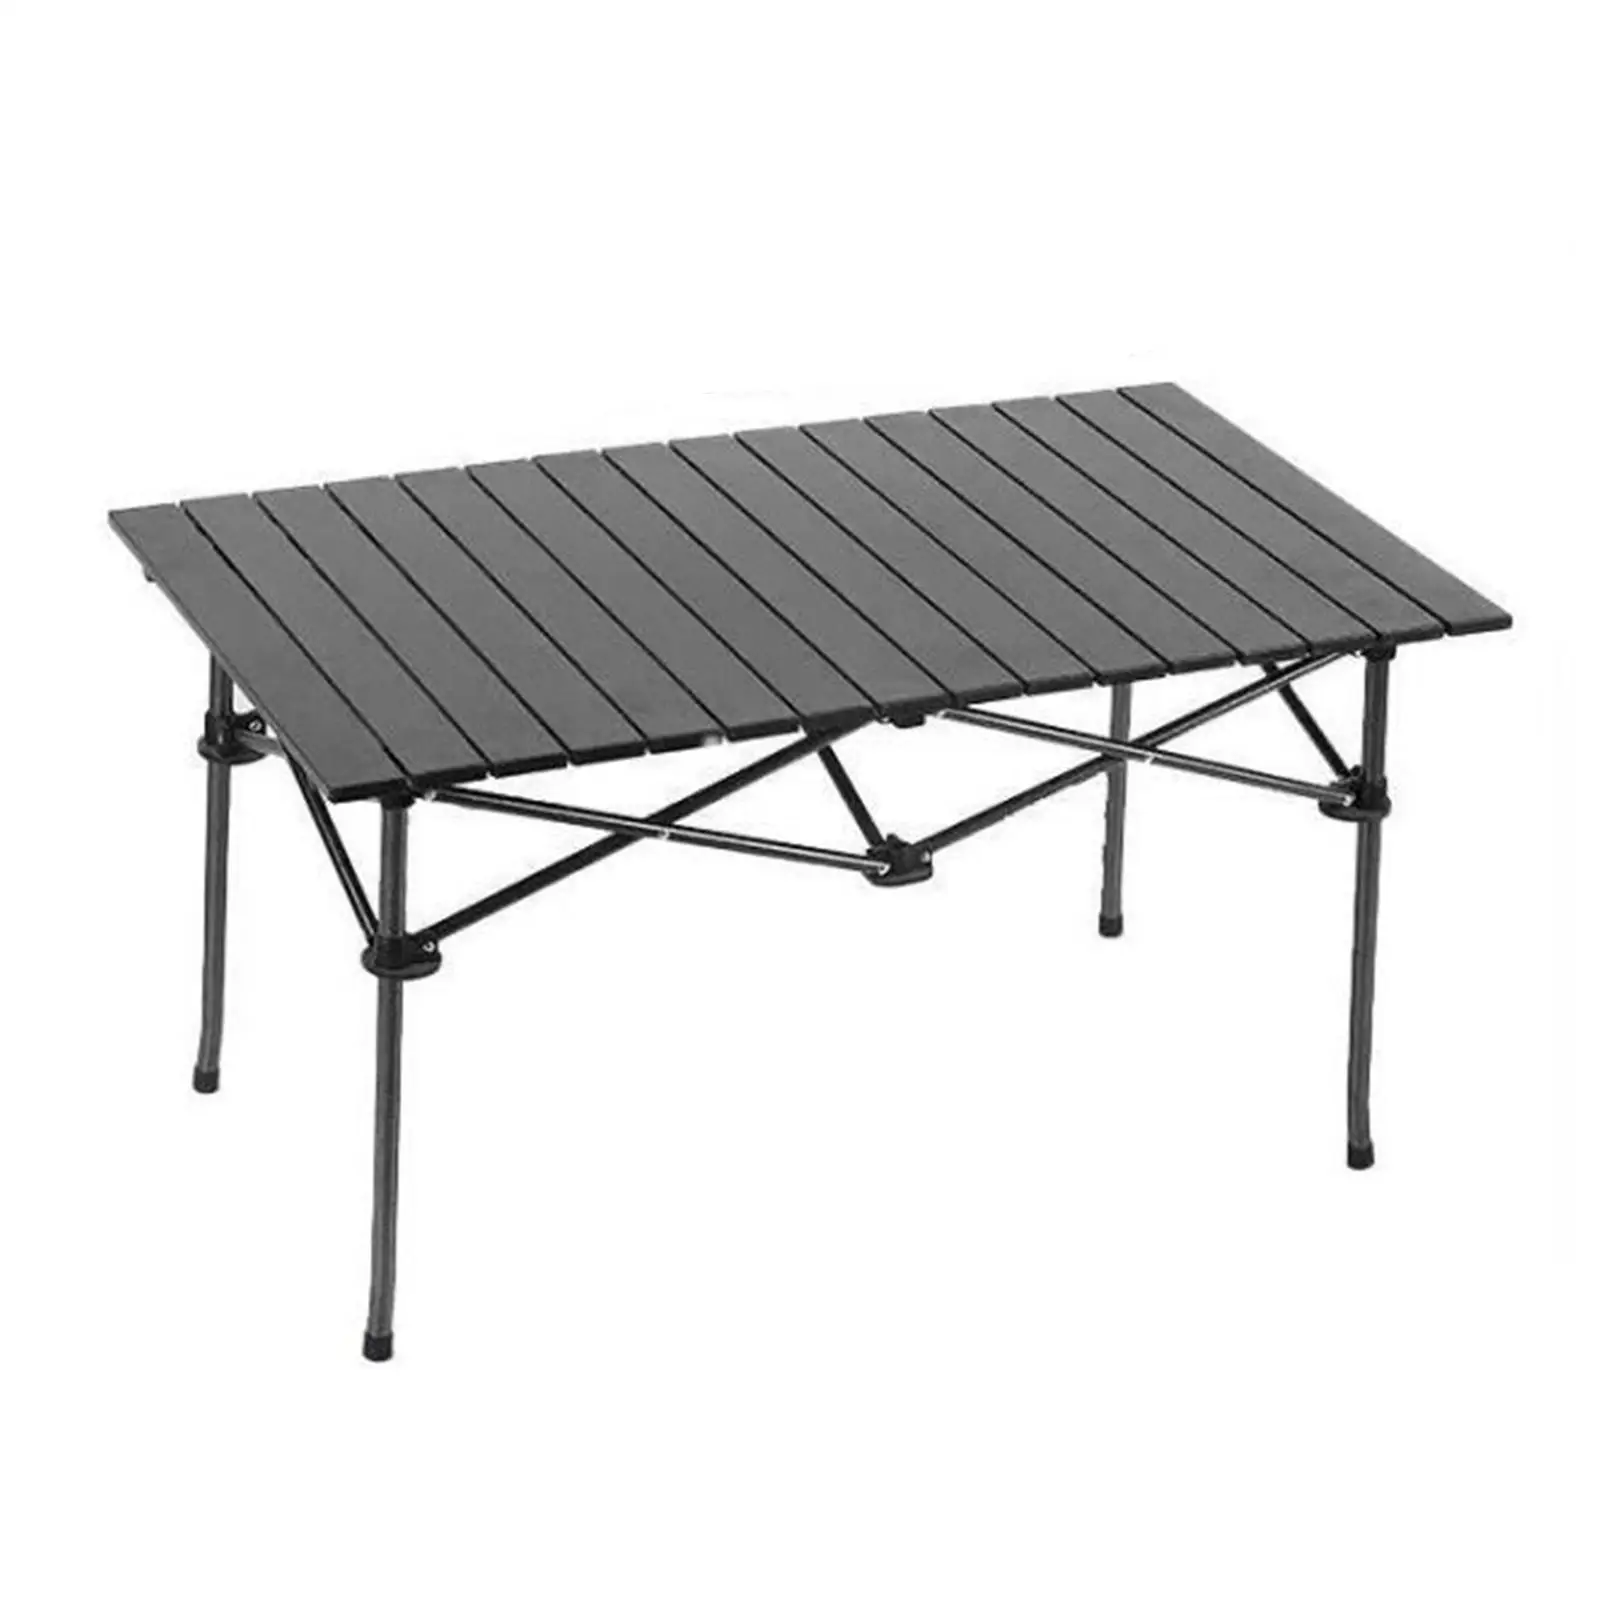 Folding Table Board Aluminum Alloy Convenient Spare Parts Collapsible Accessory